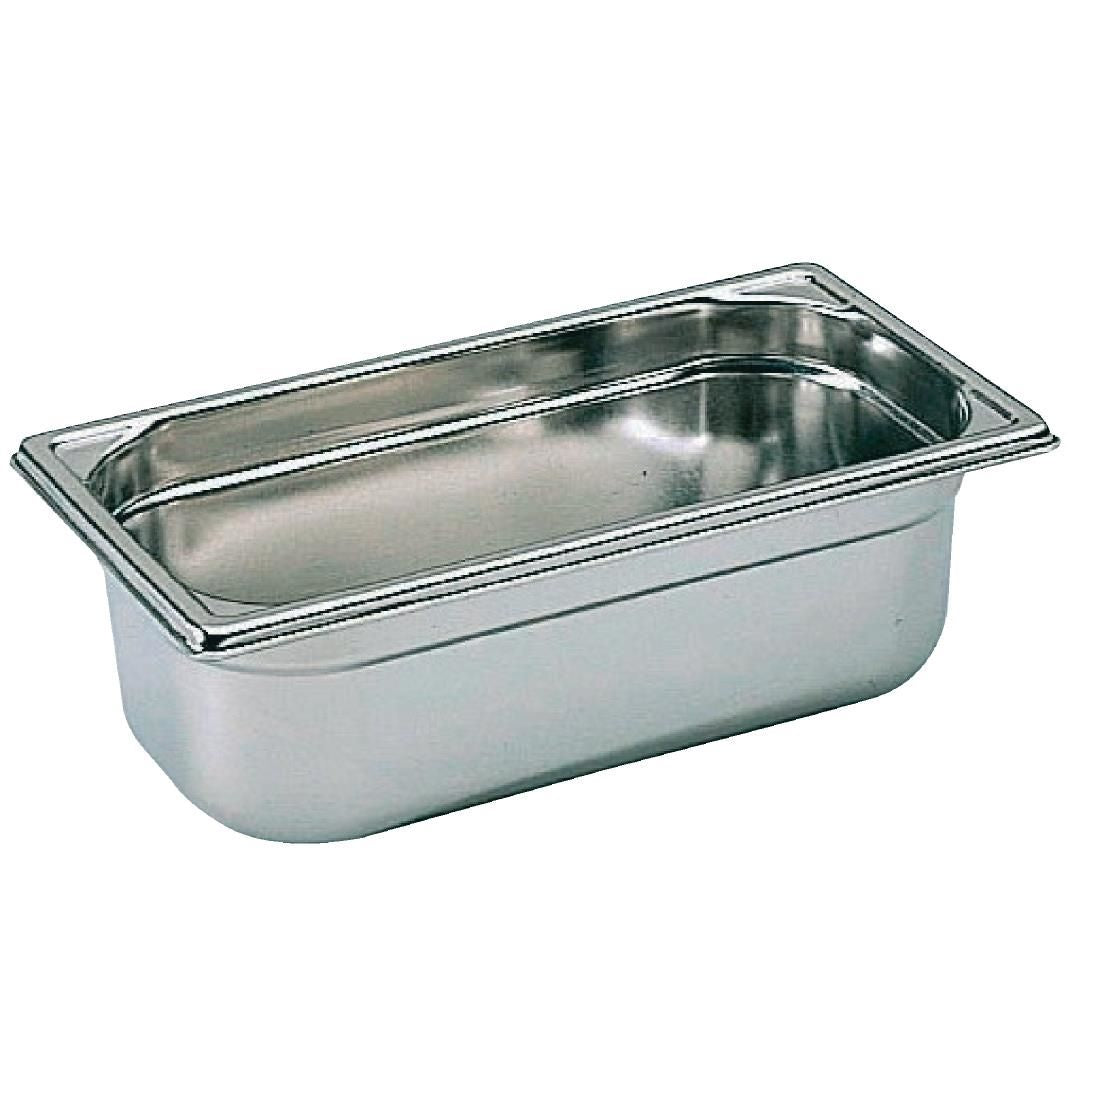 Bourgeat Stainless Steel 1/3 Gastronorm Pan 200mm JD Catering Equipment Solutions Ltd